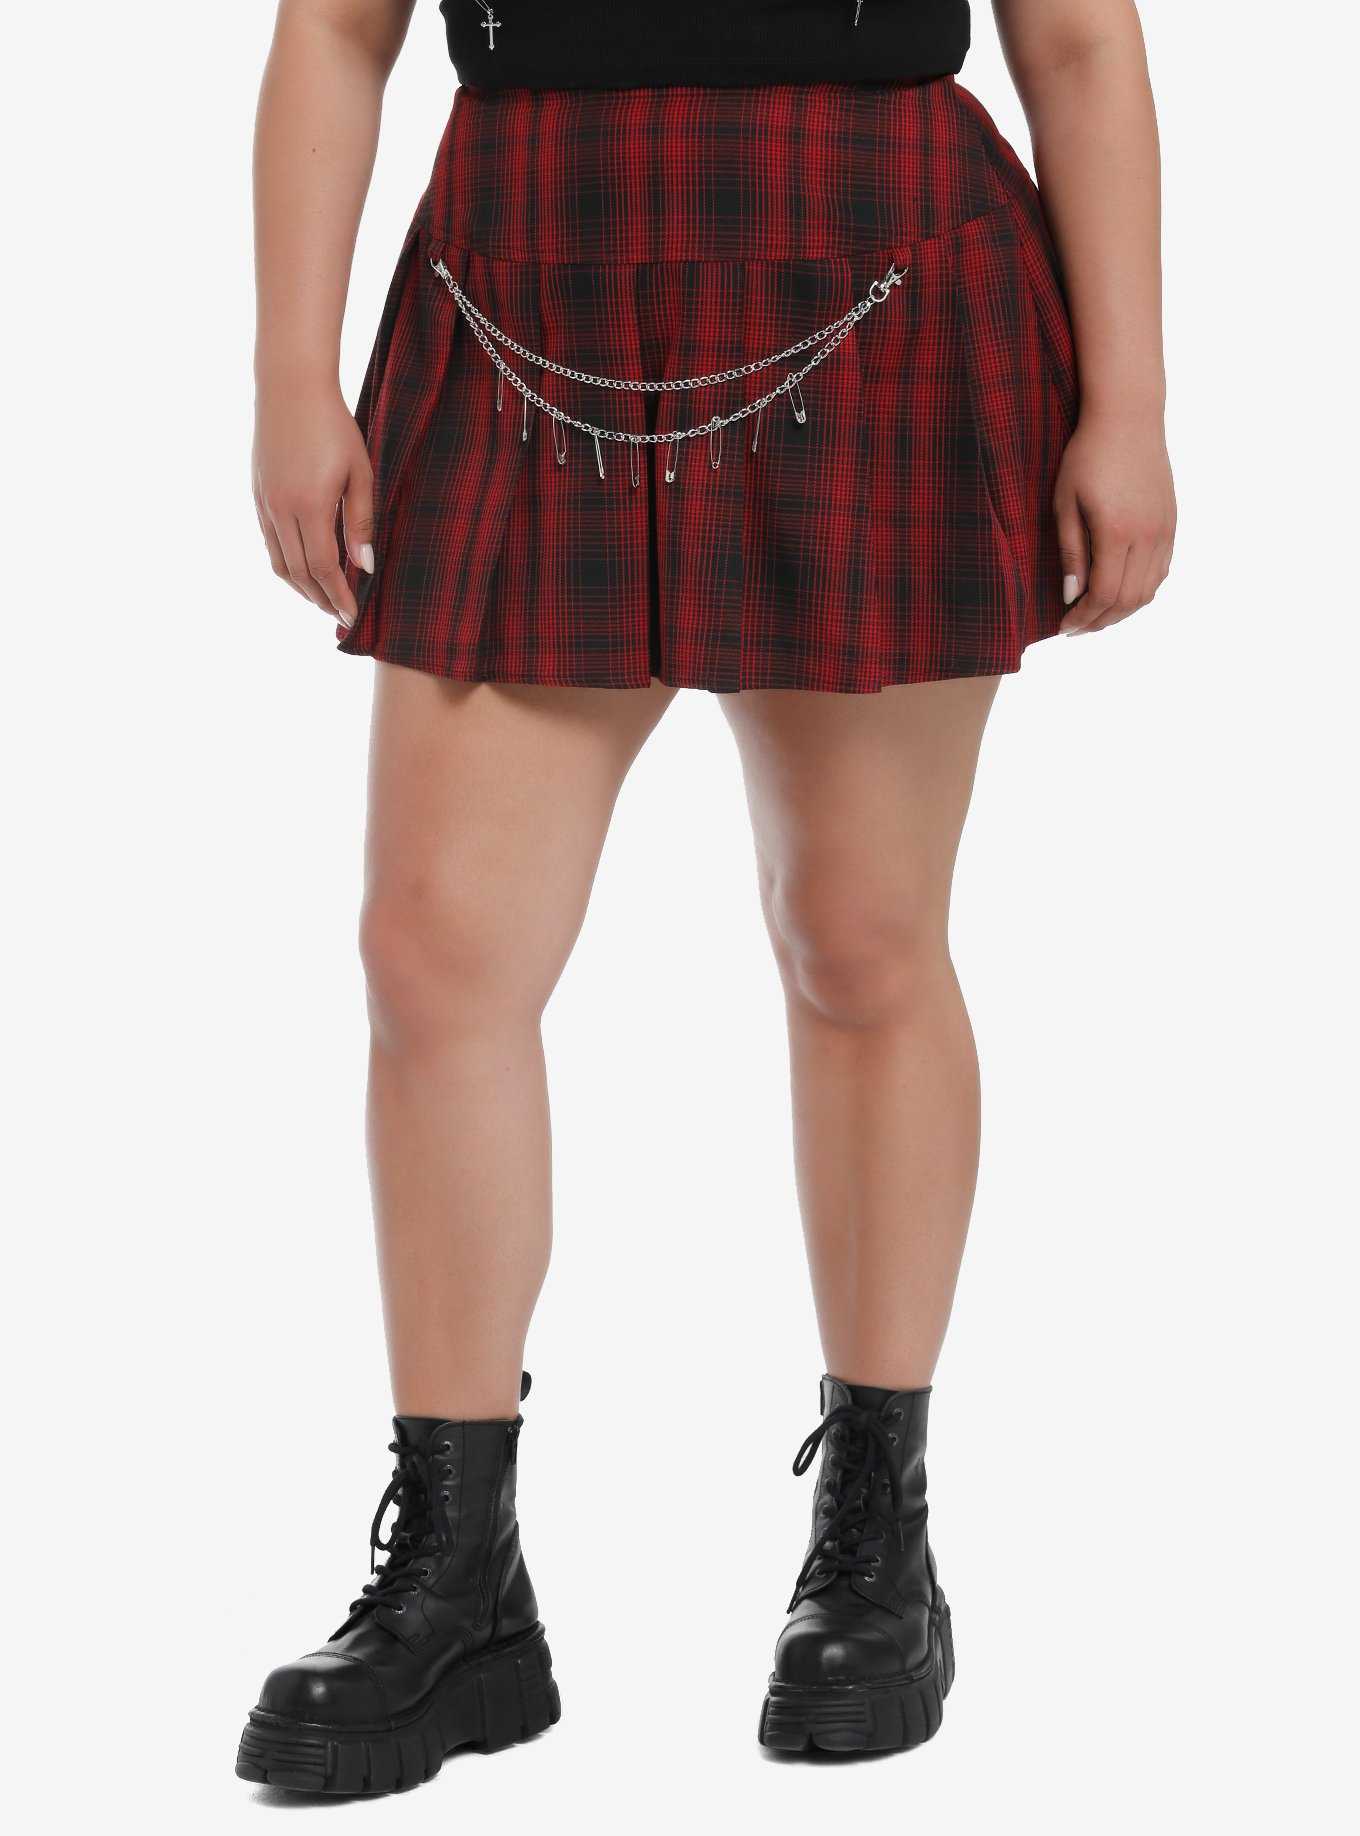 Social Collision Red Plaid Chain Safety Pin Skirt Plus Size, , hi-res